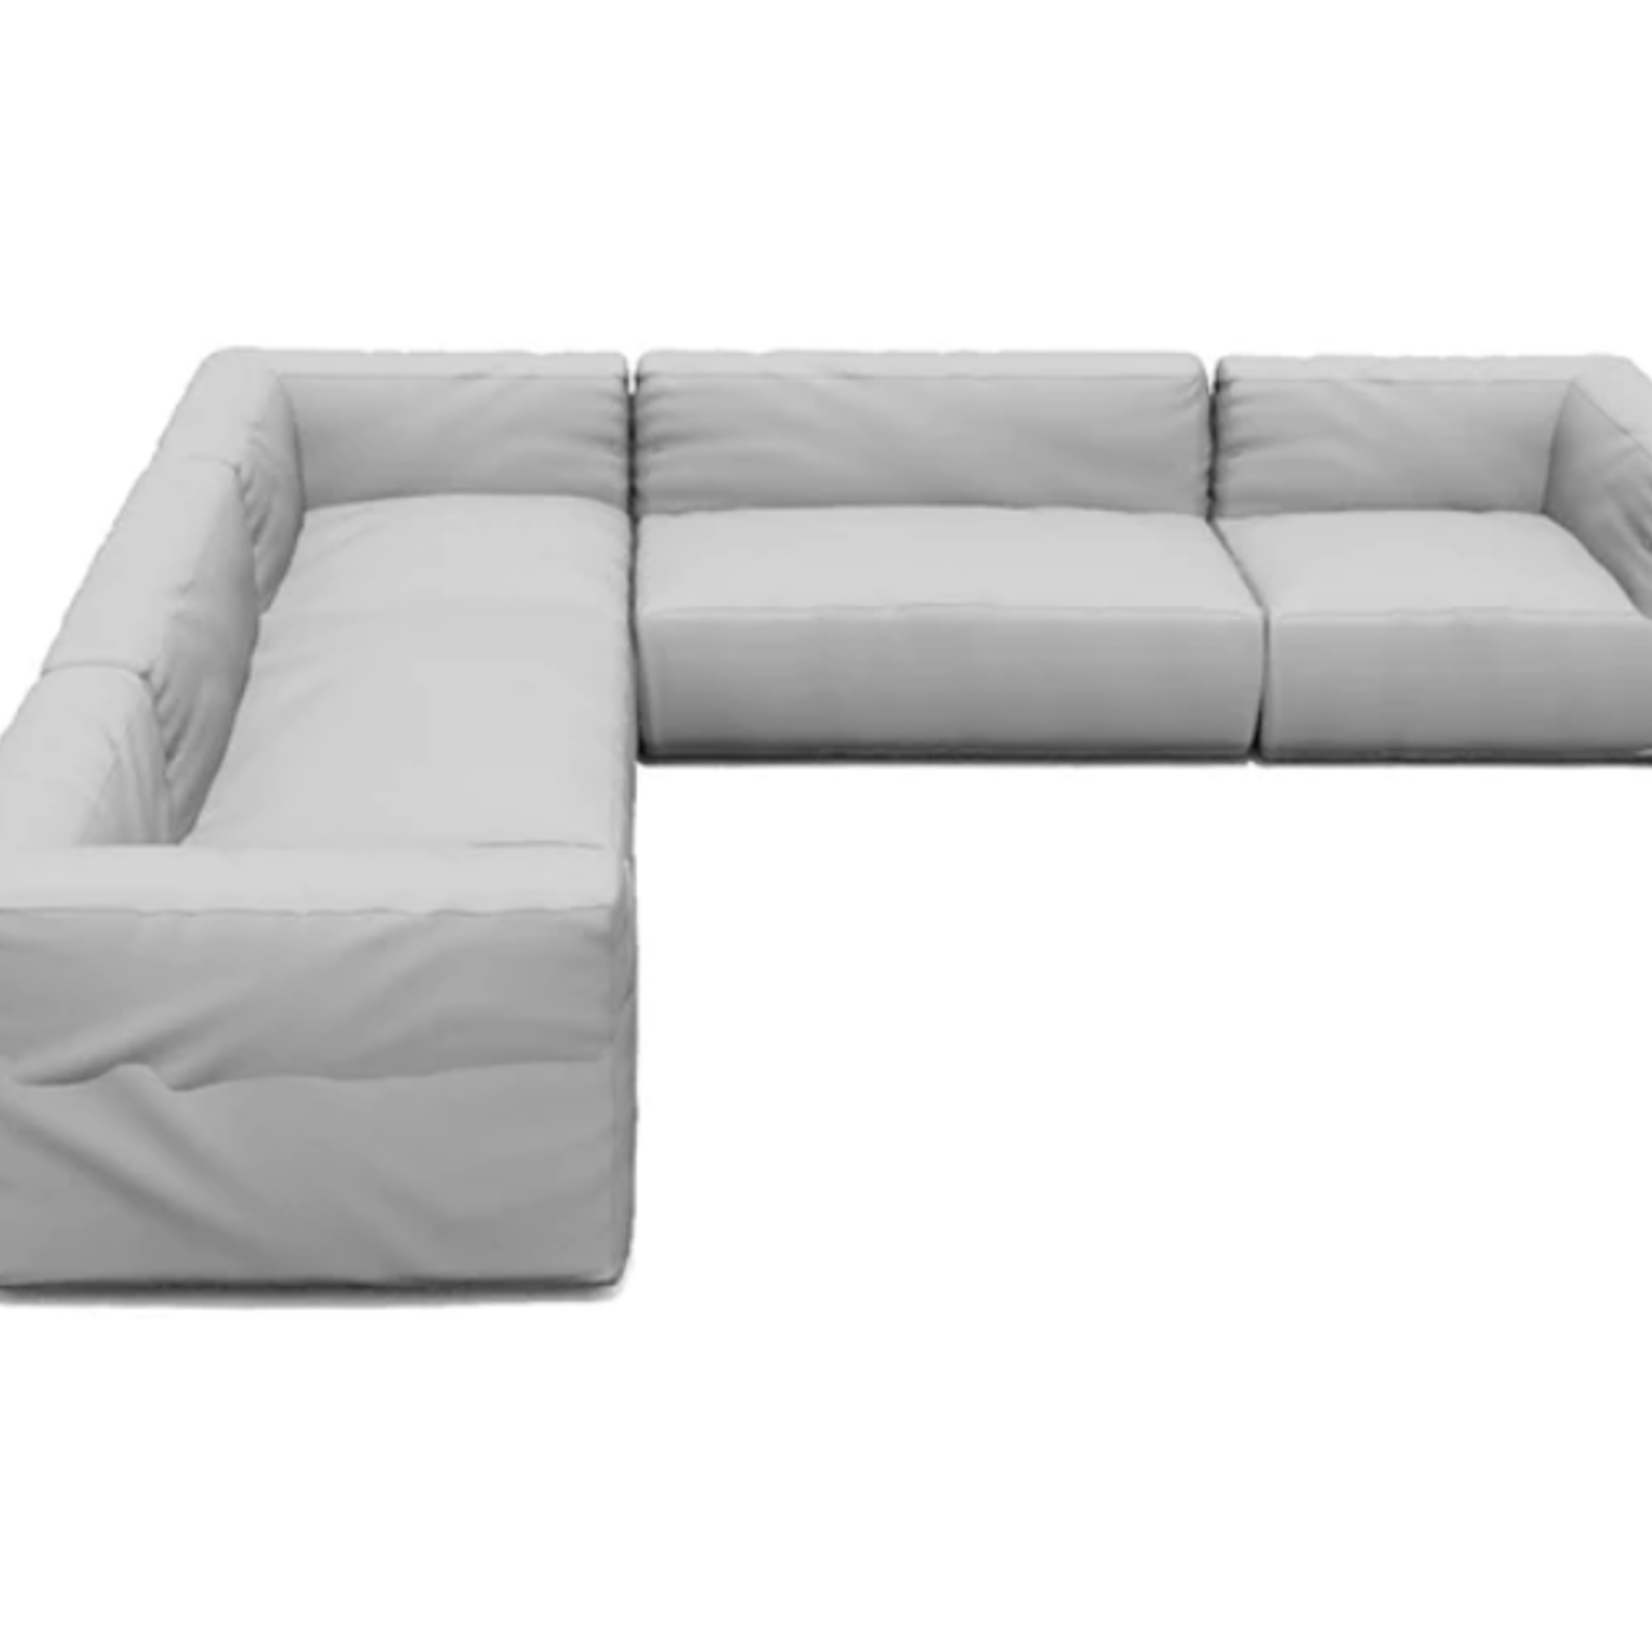 Blomus GROW Sectional Config. F | Outdoor